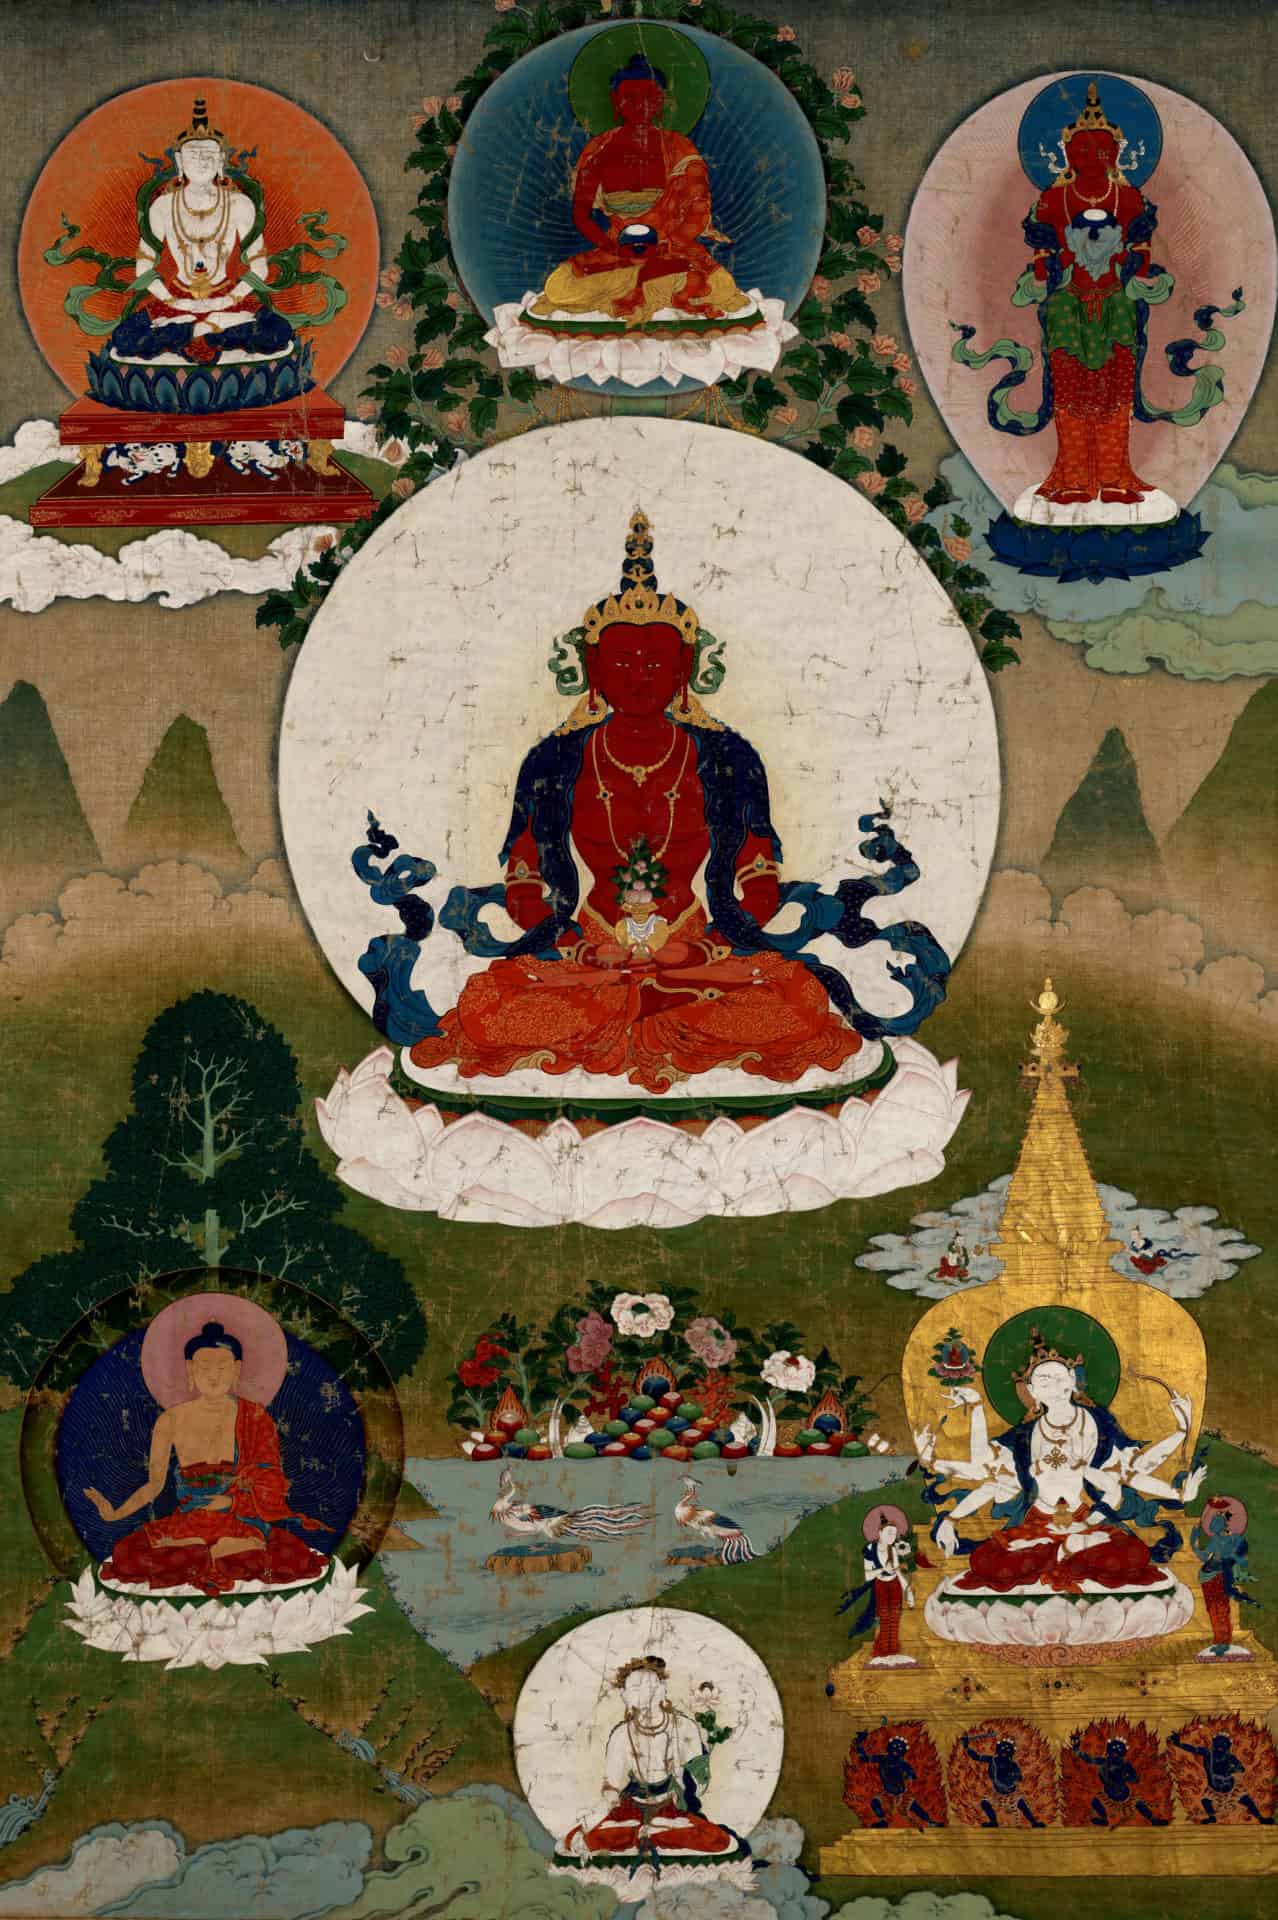 Tsepakmé, the Buddha of Unlimited Life, 19th century. Distemper on cloth, Eastern Tibet style. Maker(s) not known by WCMA. The Jack Shear Collection of Himalayan Art